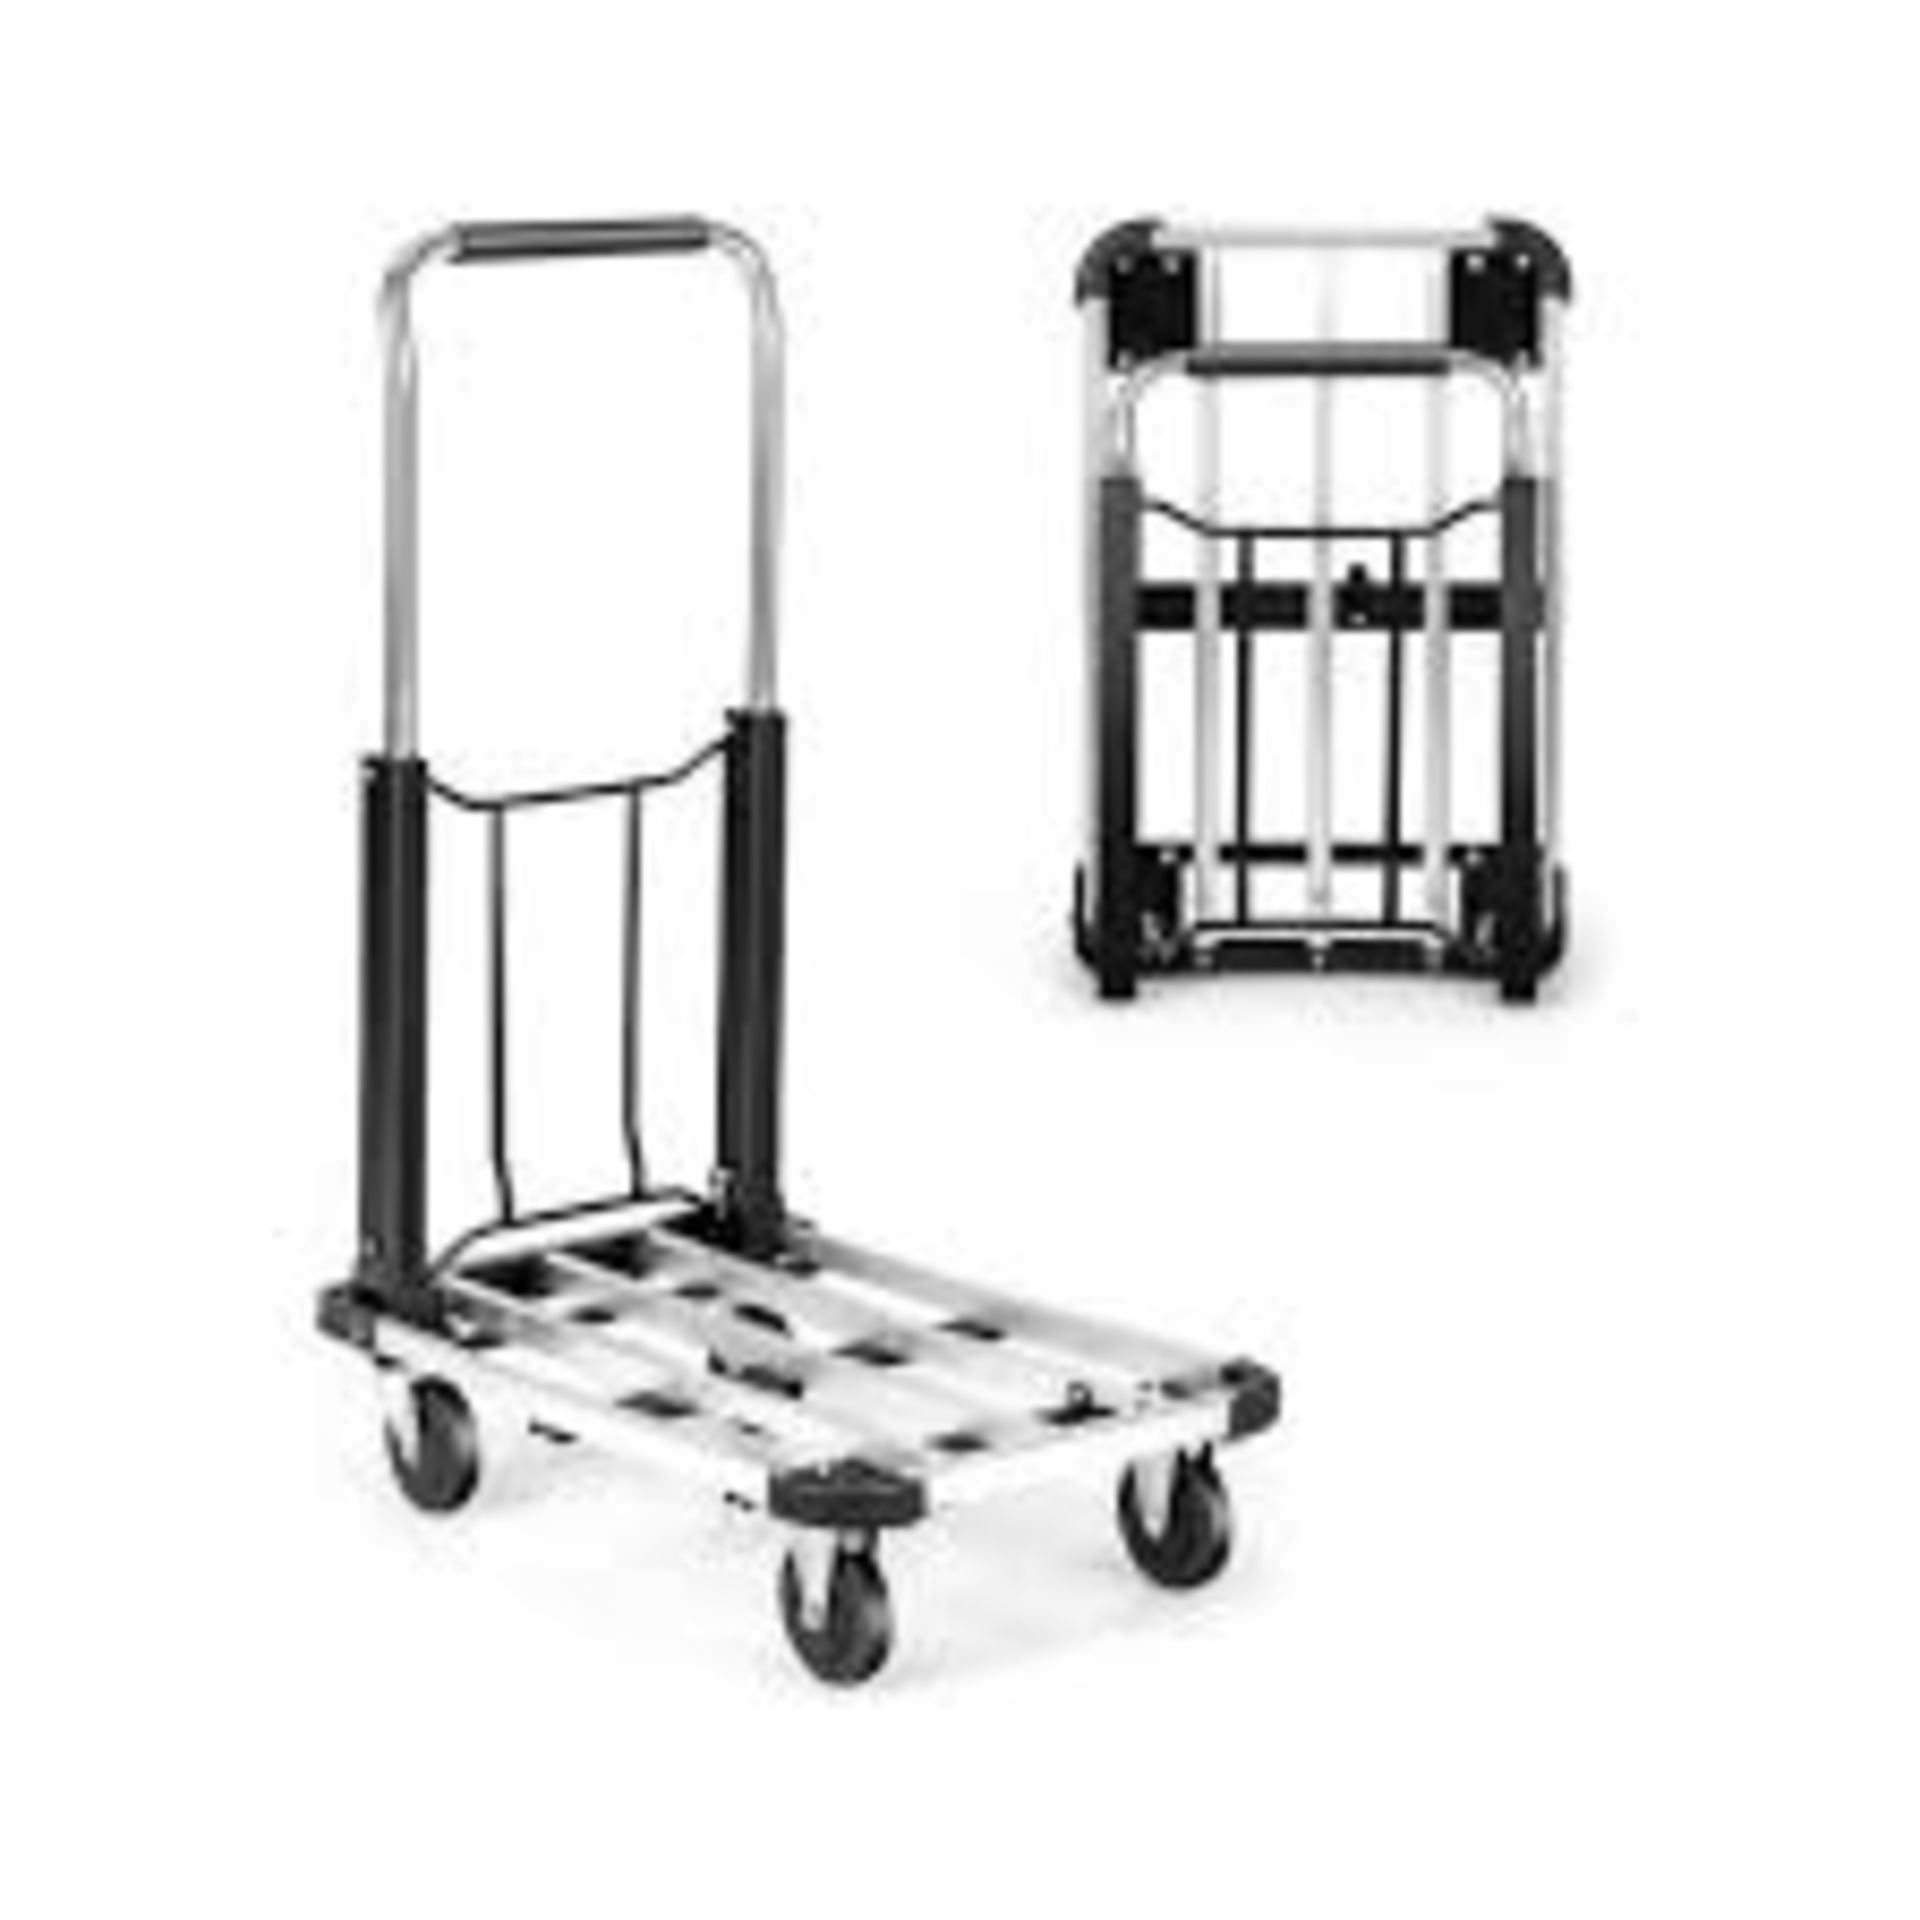 4 Wheels Aluminum Rolling Dolly Flatbed Cart with Extendable Base. -R13a.4.